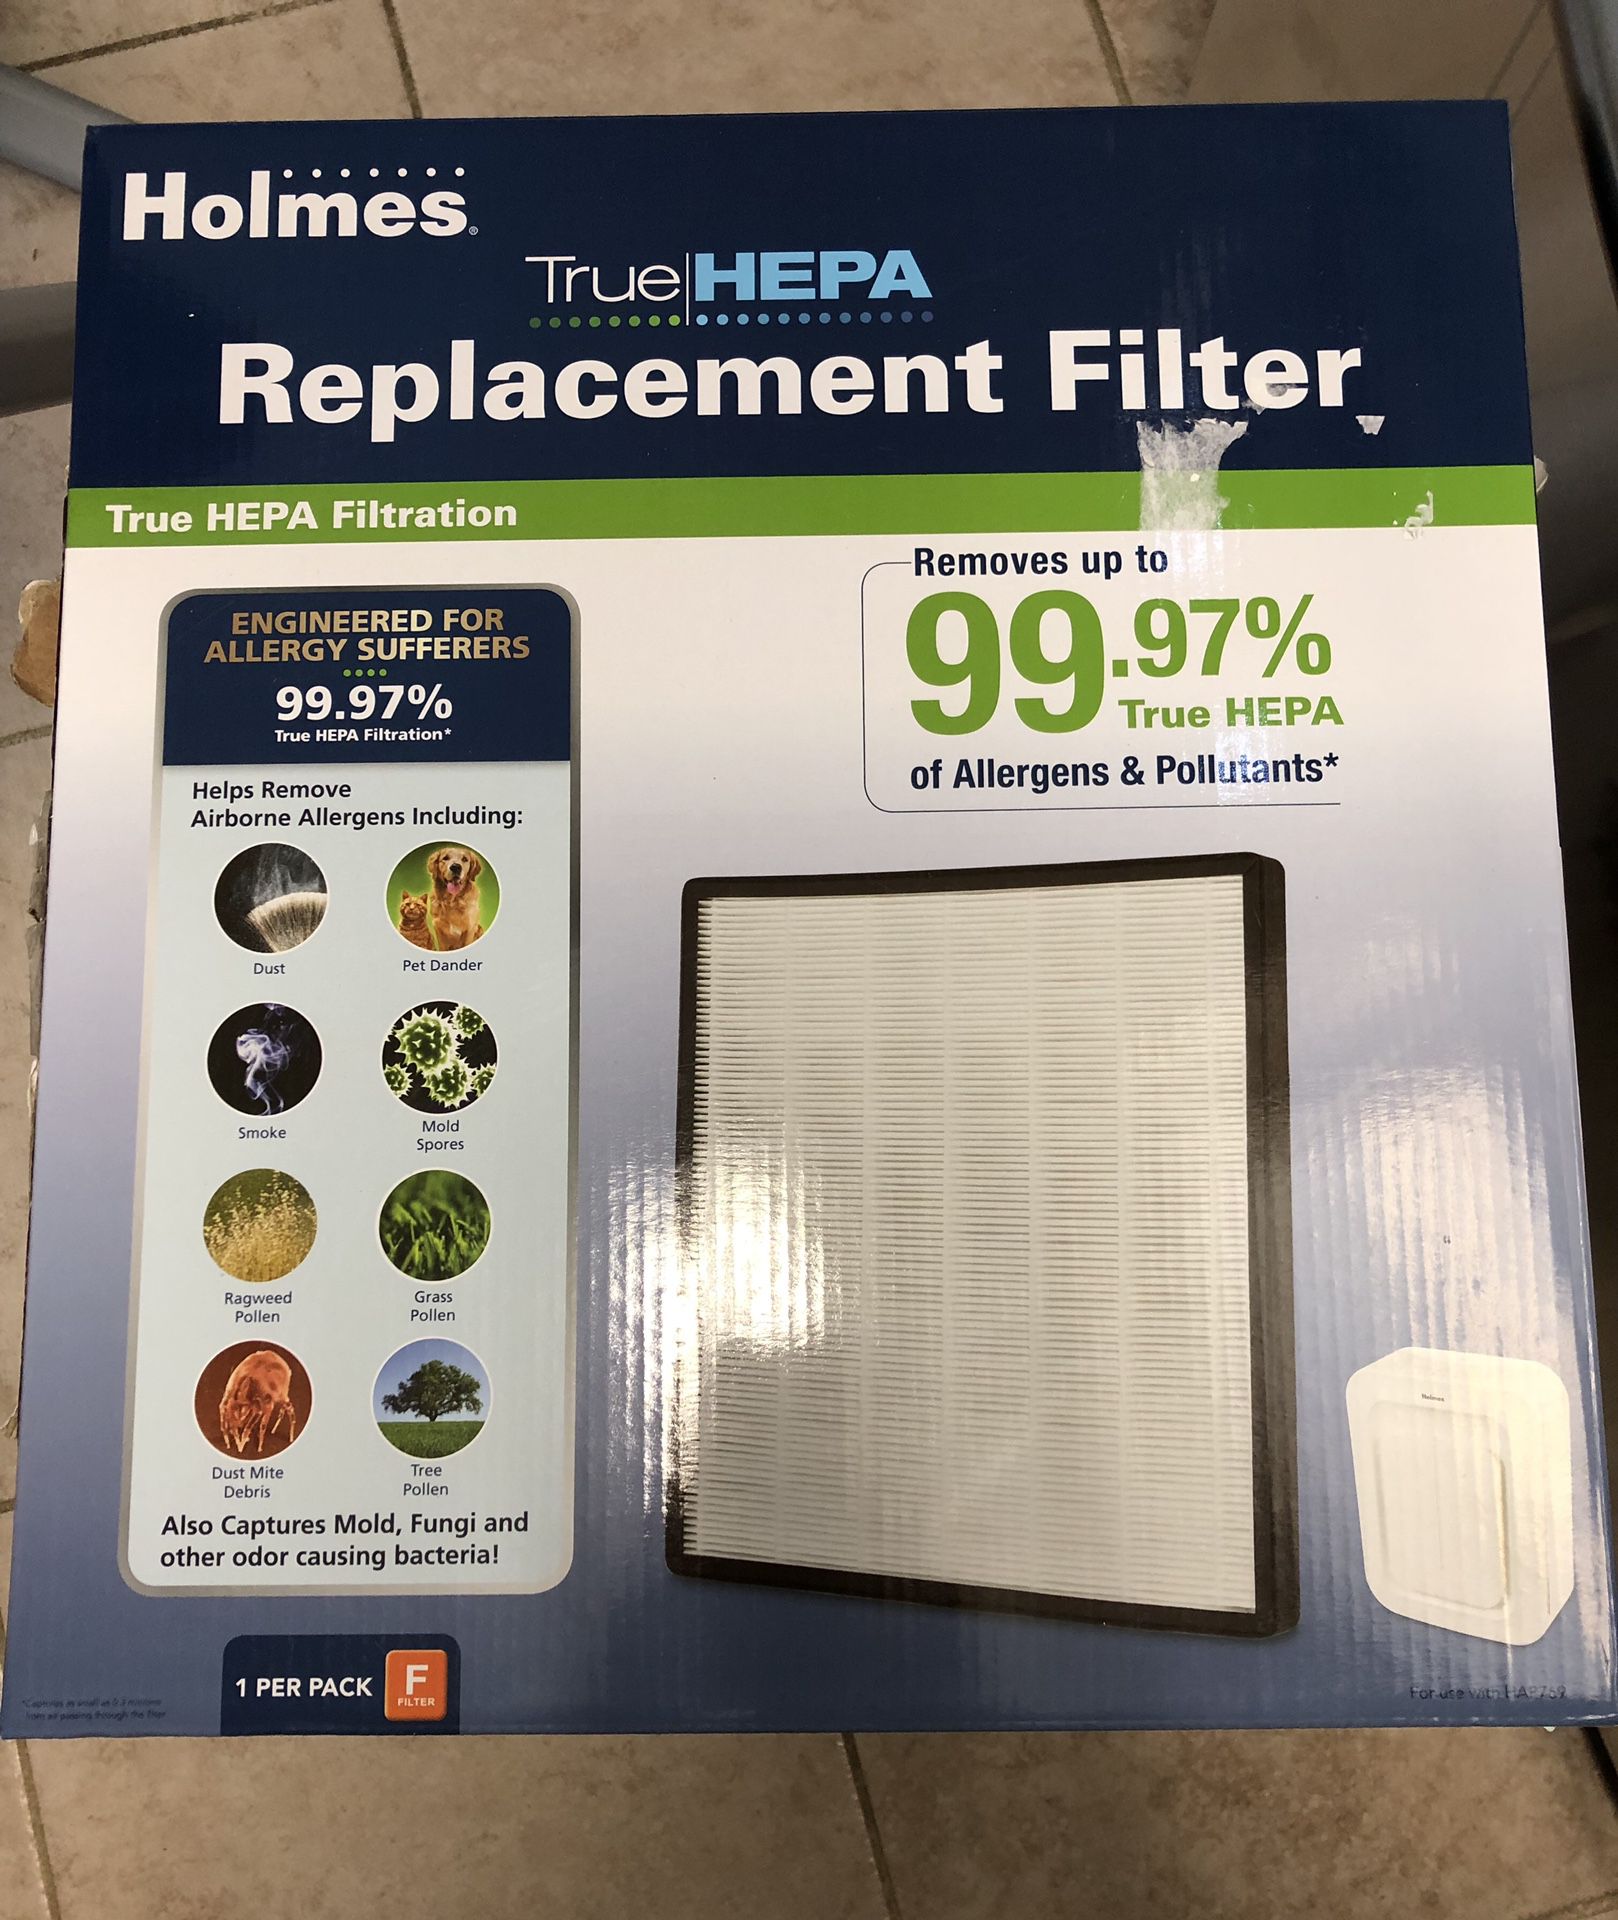 Holmes HAPF700 True HEPA Replacement Filter. 3-pack. Valued at $ 84.00